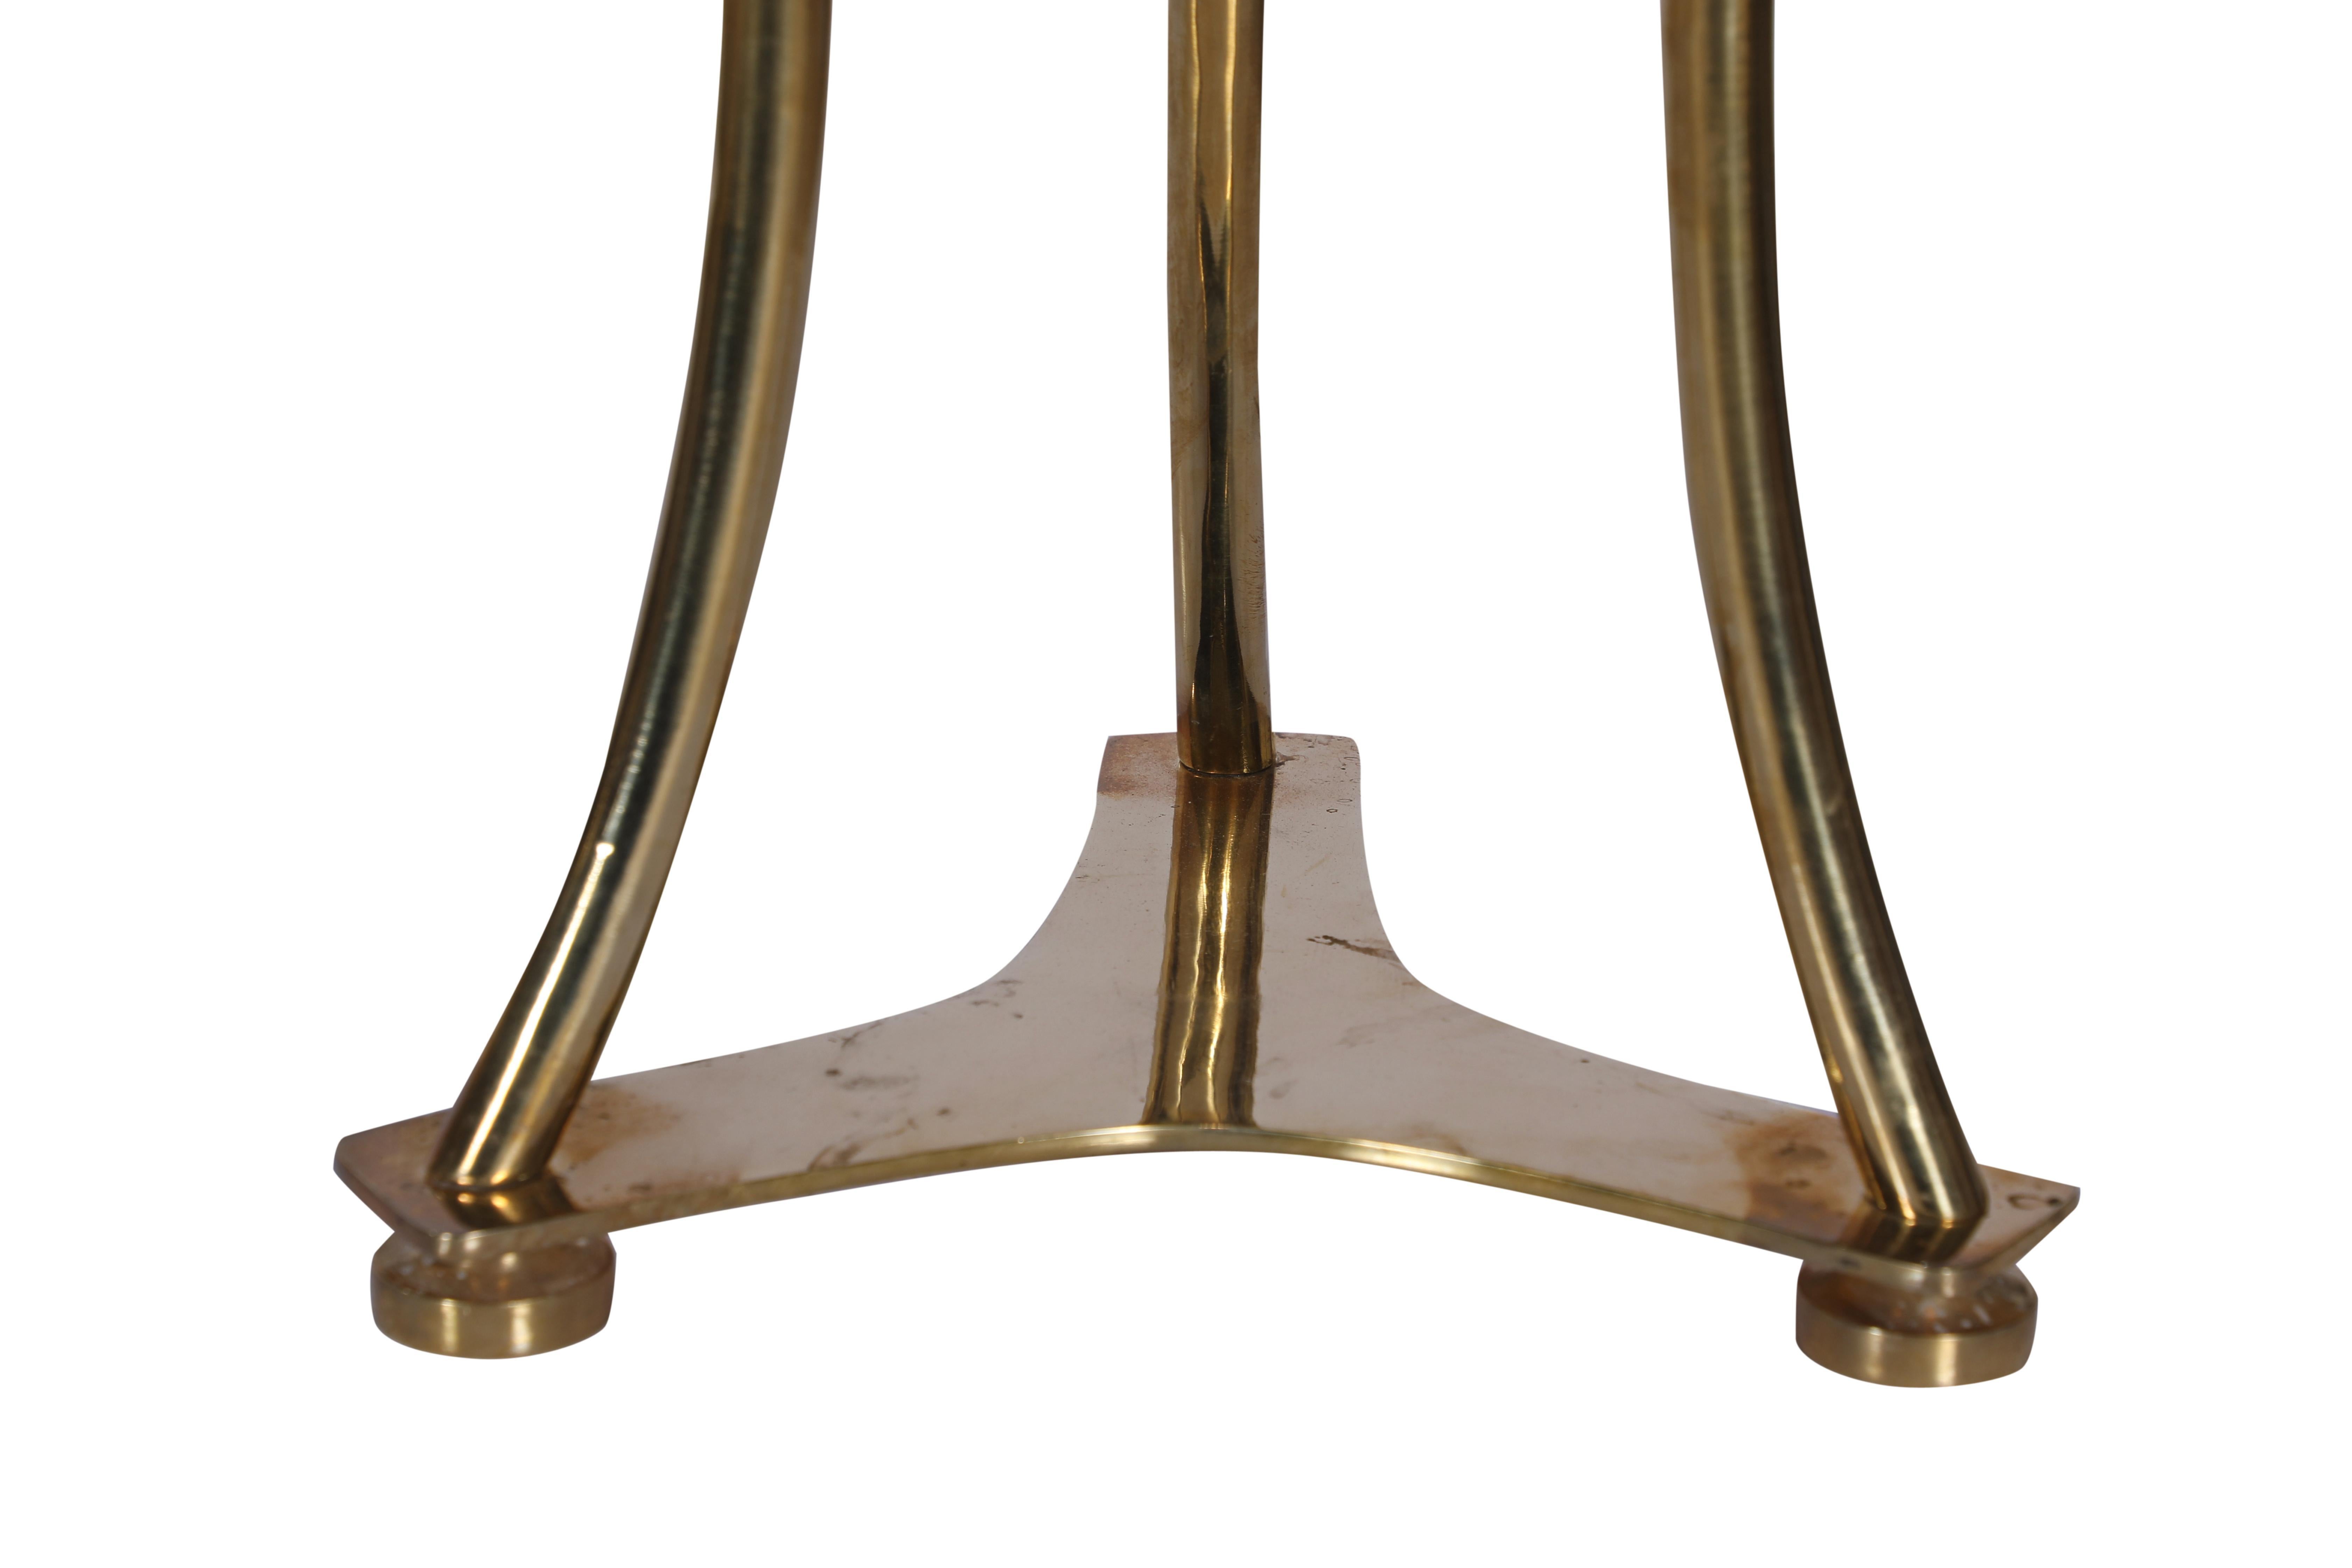 20th Century Brass Ship's Cassens & Plath Compass, Converted to Side Table, English, 1970s